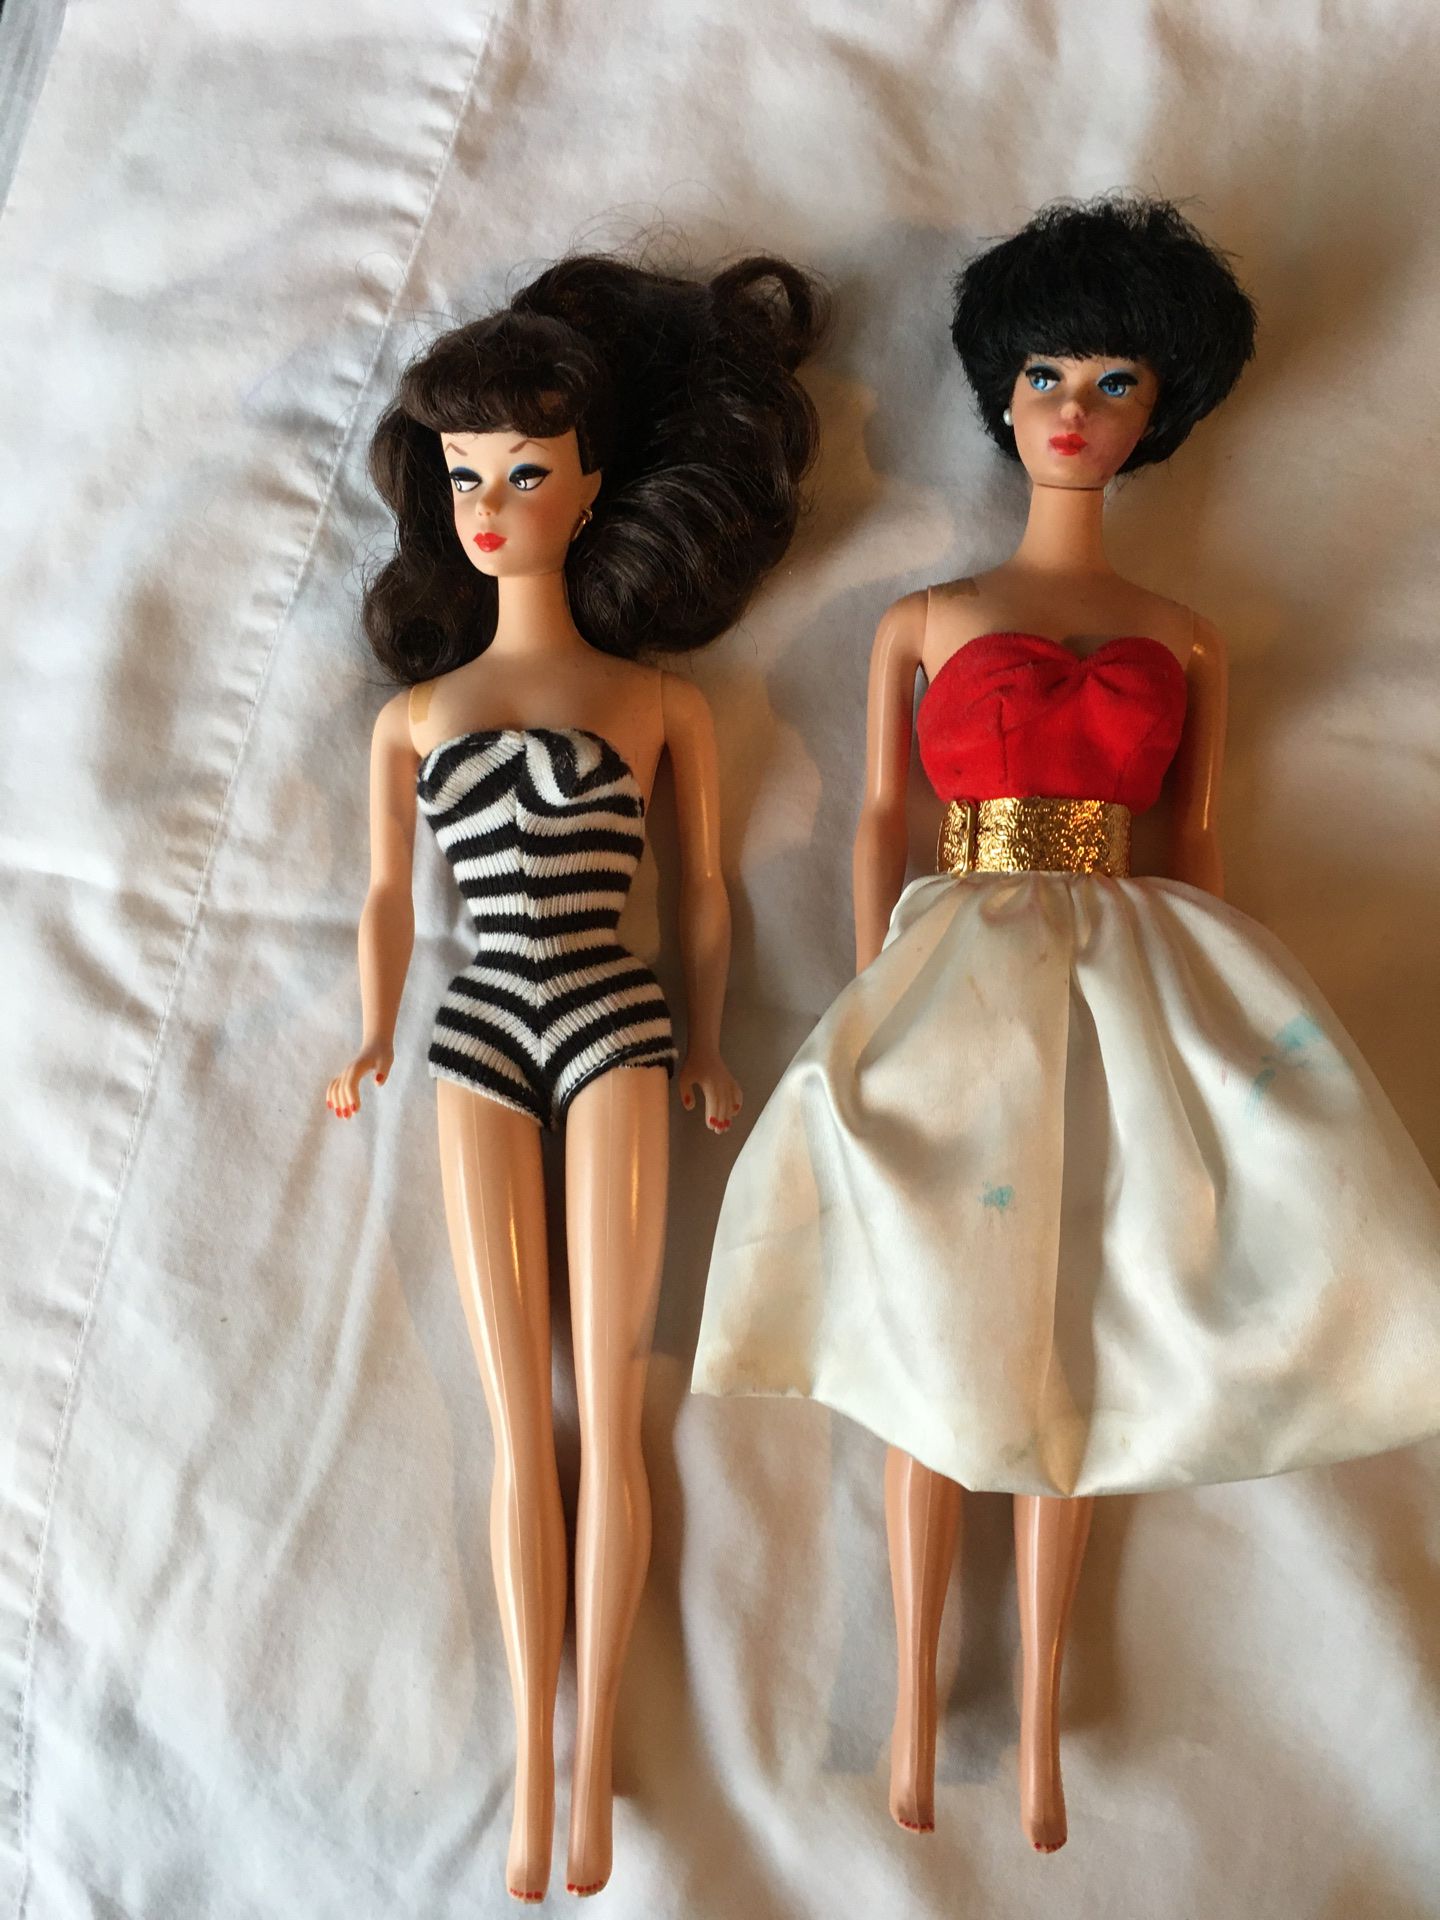 Collectible barbies